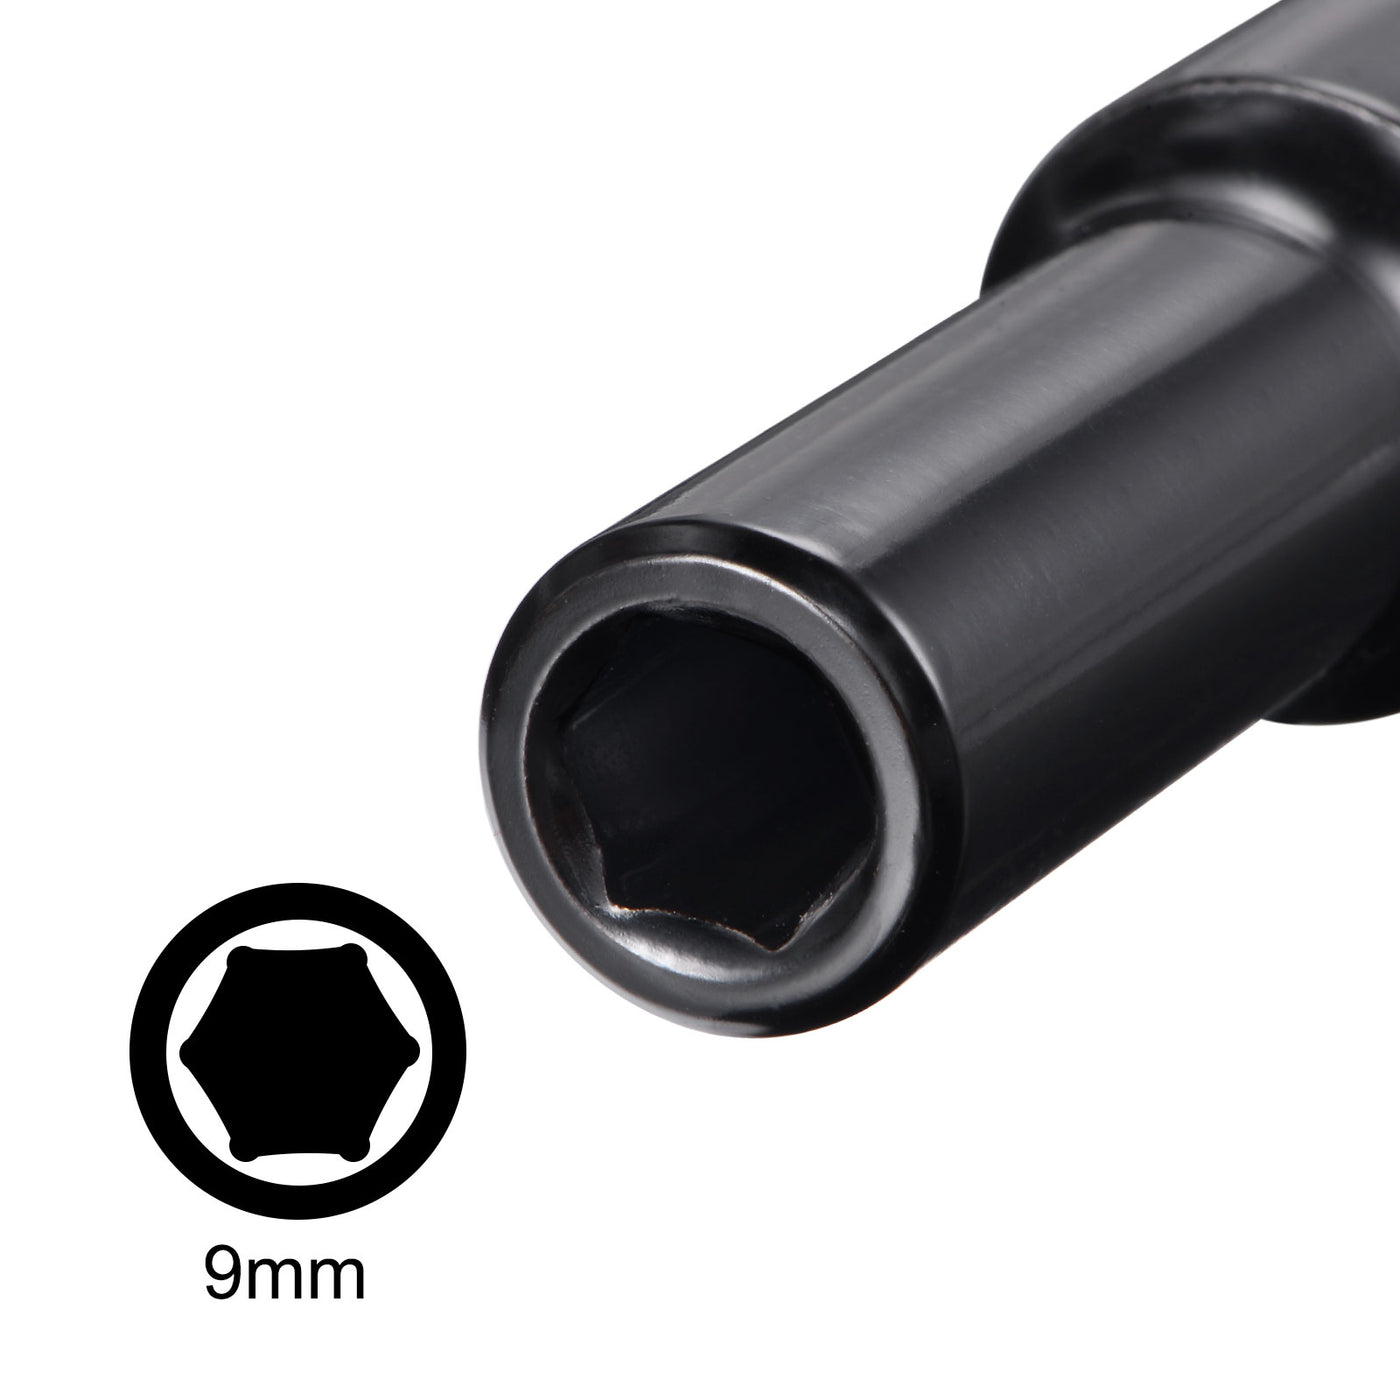 uxcell Uxcell Deep Impact Socket, CR-V, 6-Point Metric Sizes